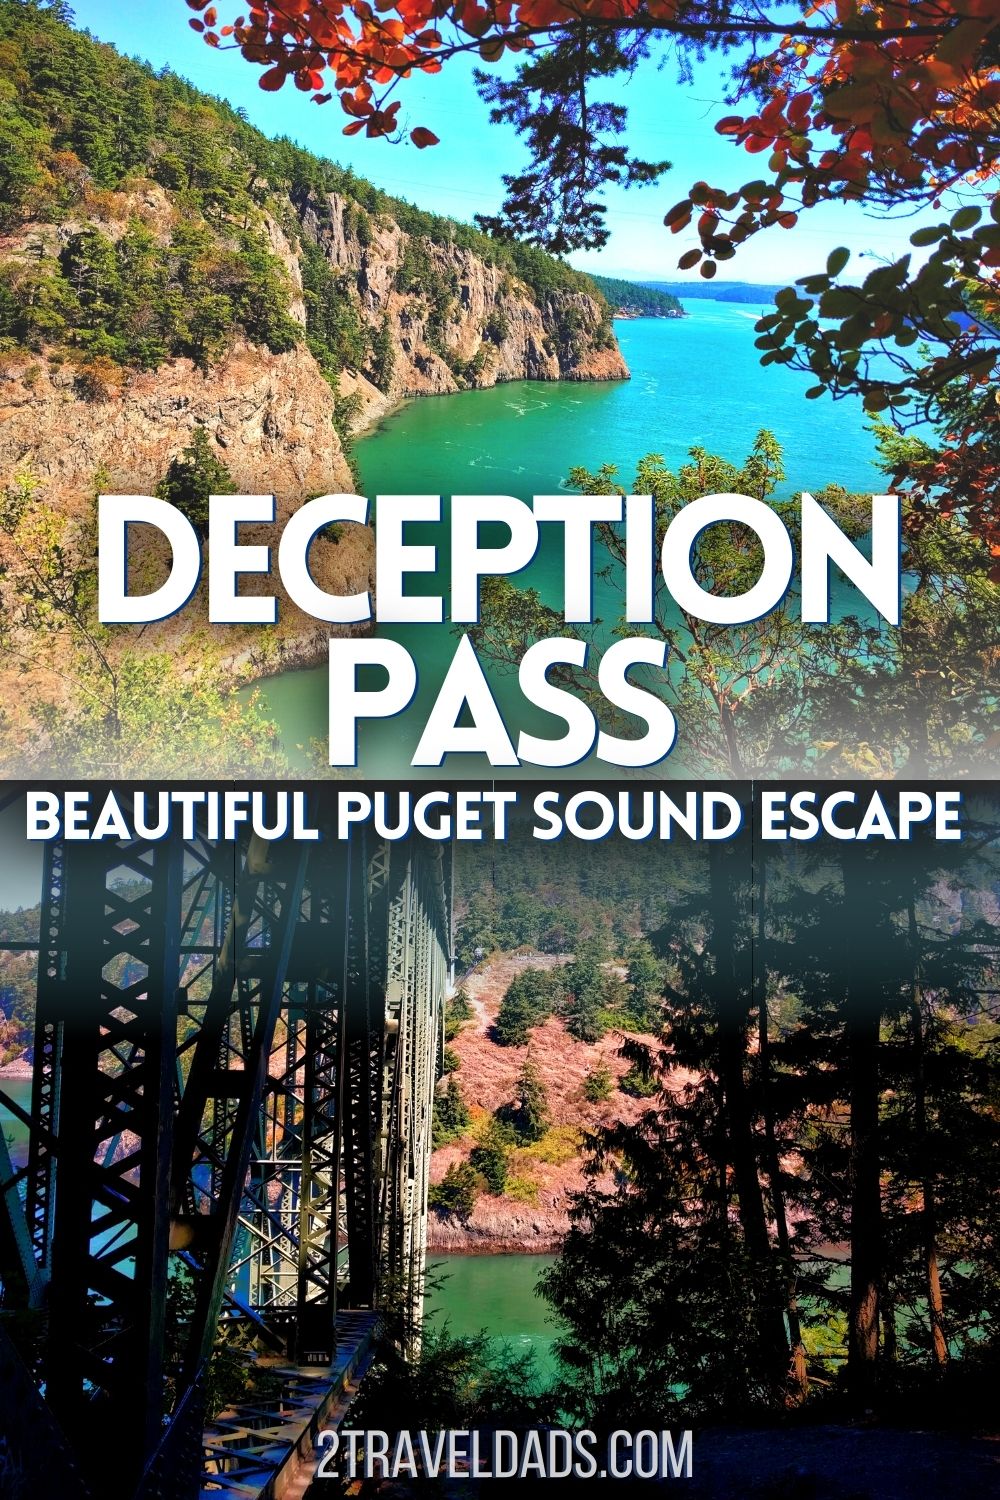 Deception Pass is one of the most unique hiking spots in the Puget Sound area. The state park includes a jagged island, deep swirling waters and beautiful beaches. Find out more about this easy weekend getaway from Seattle.